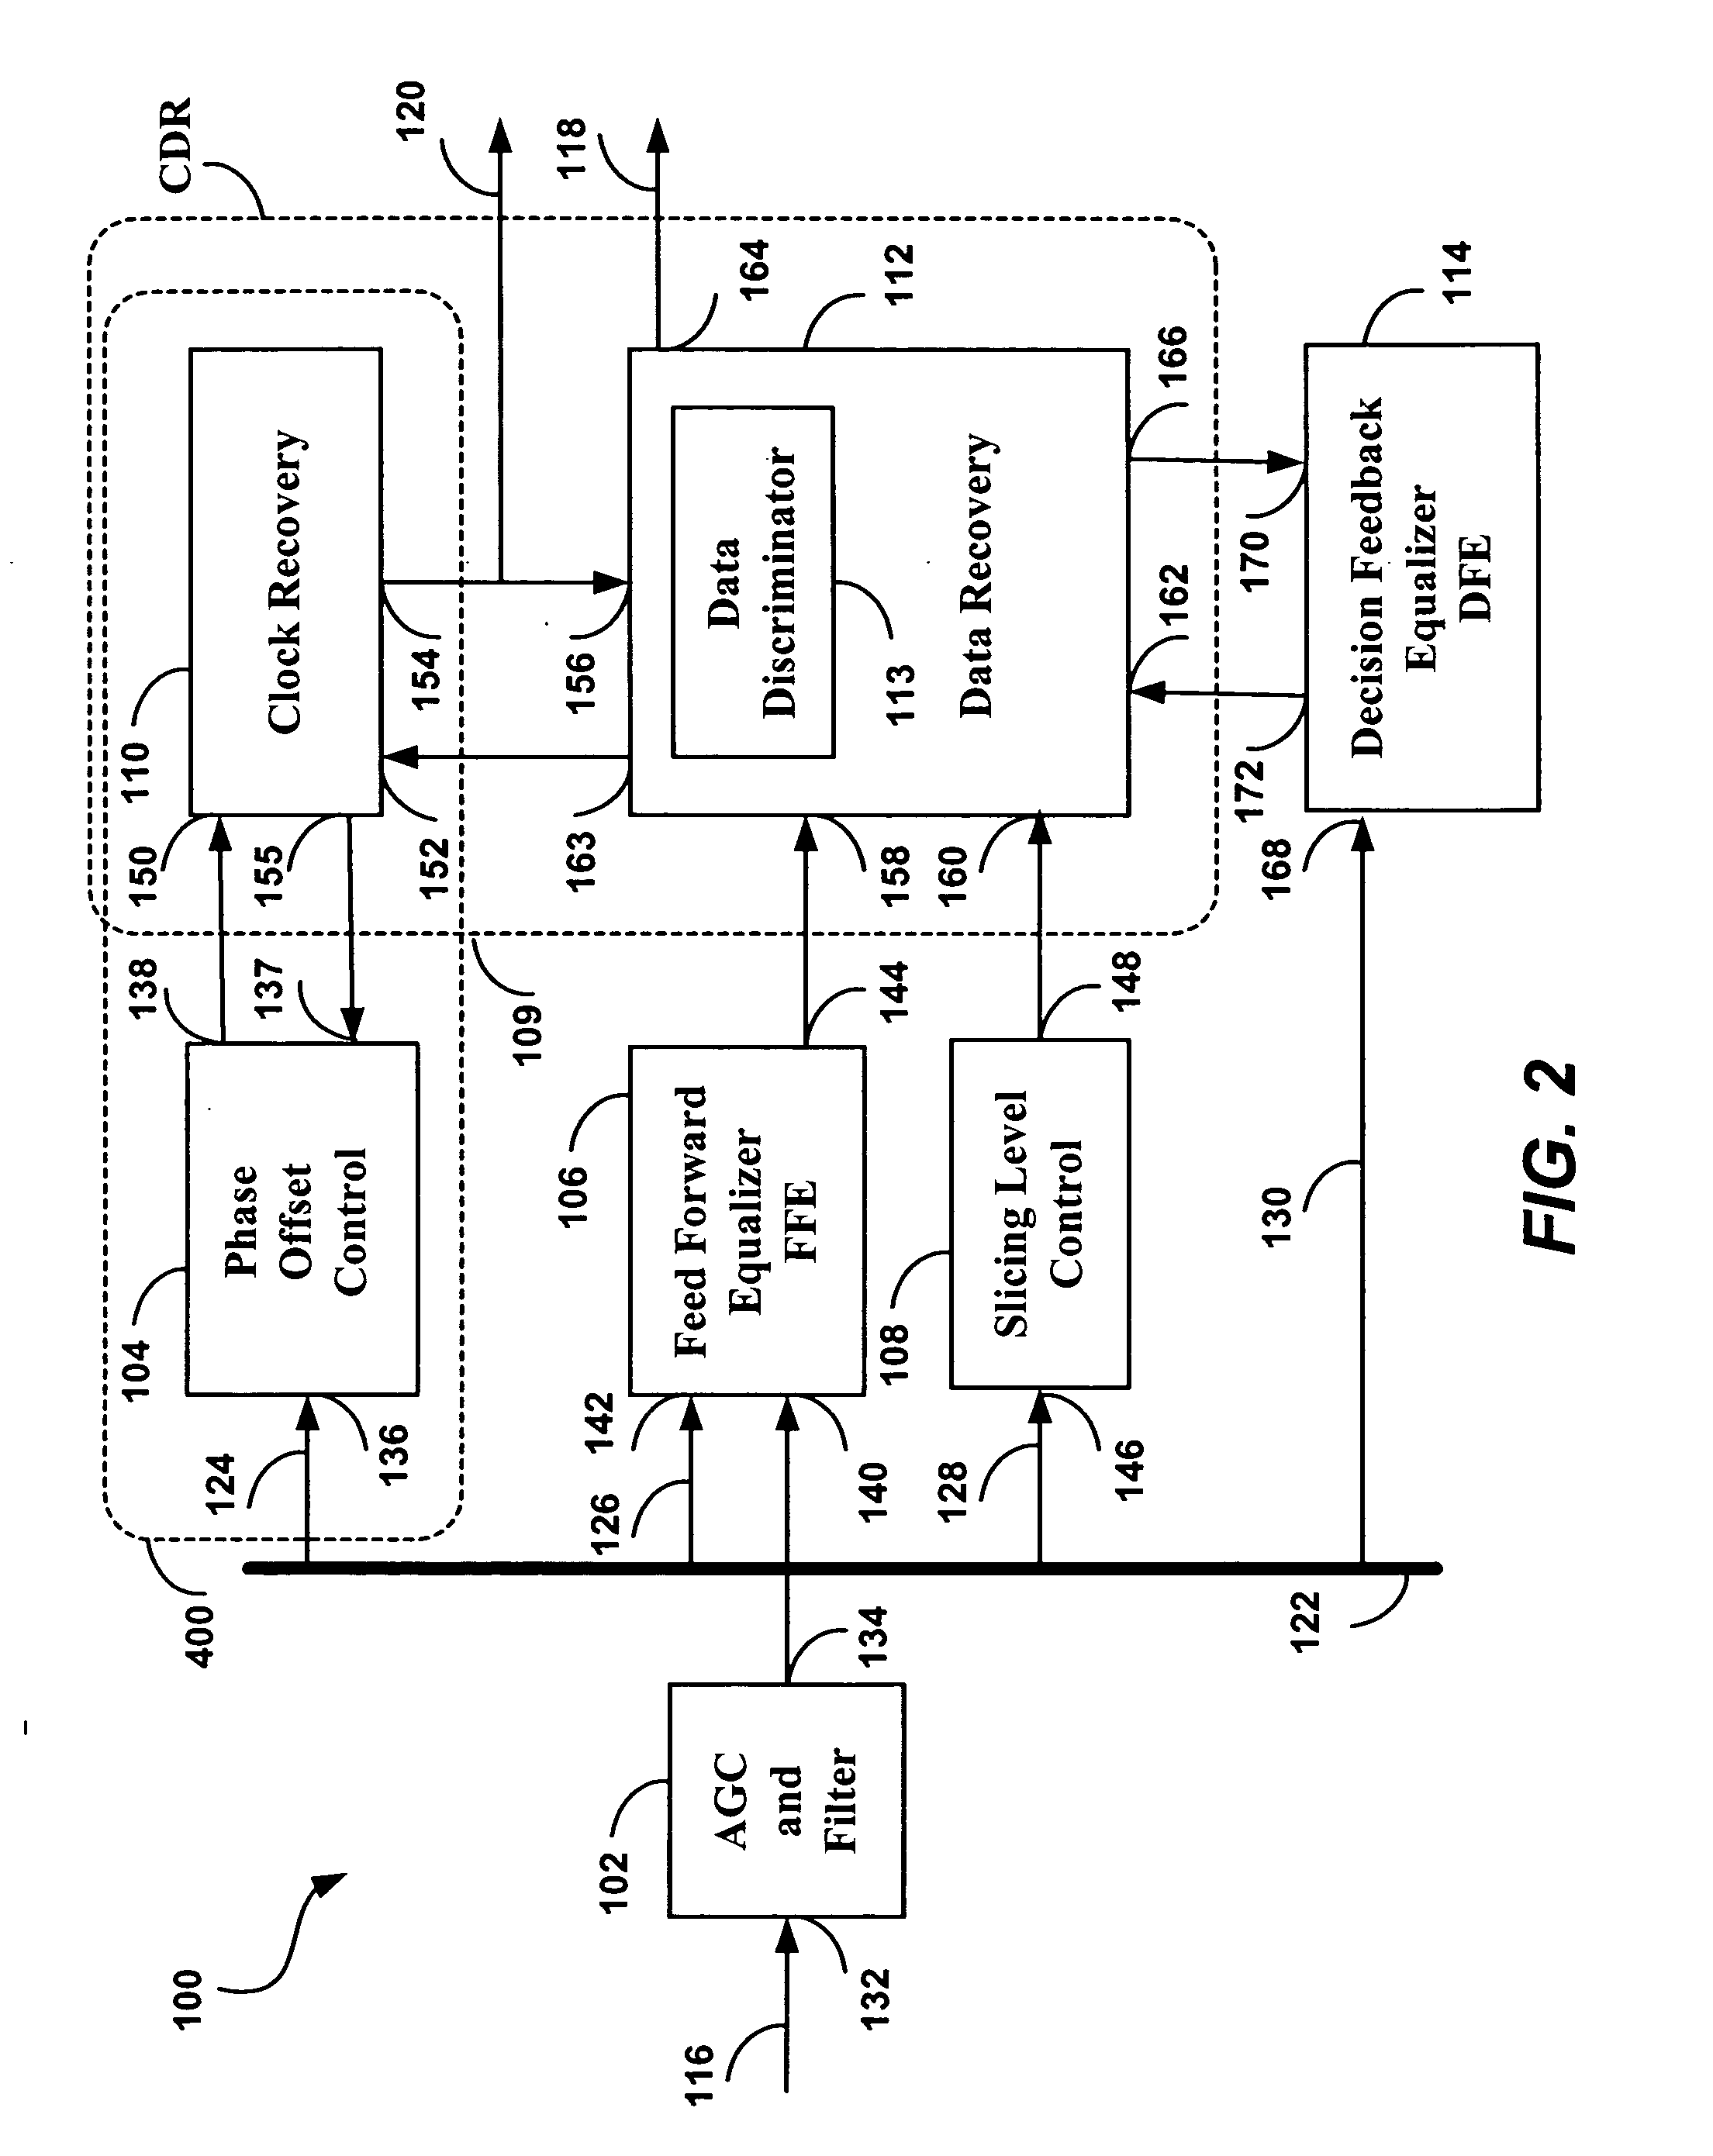 Circuit for adaptive sampling edge position control and a method therefor